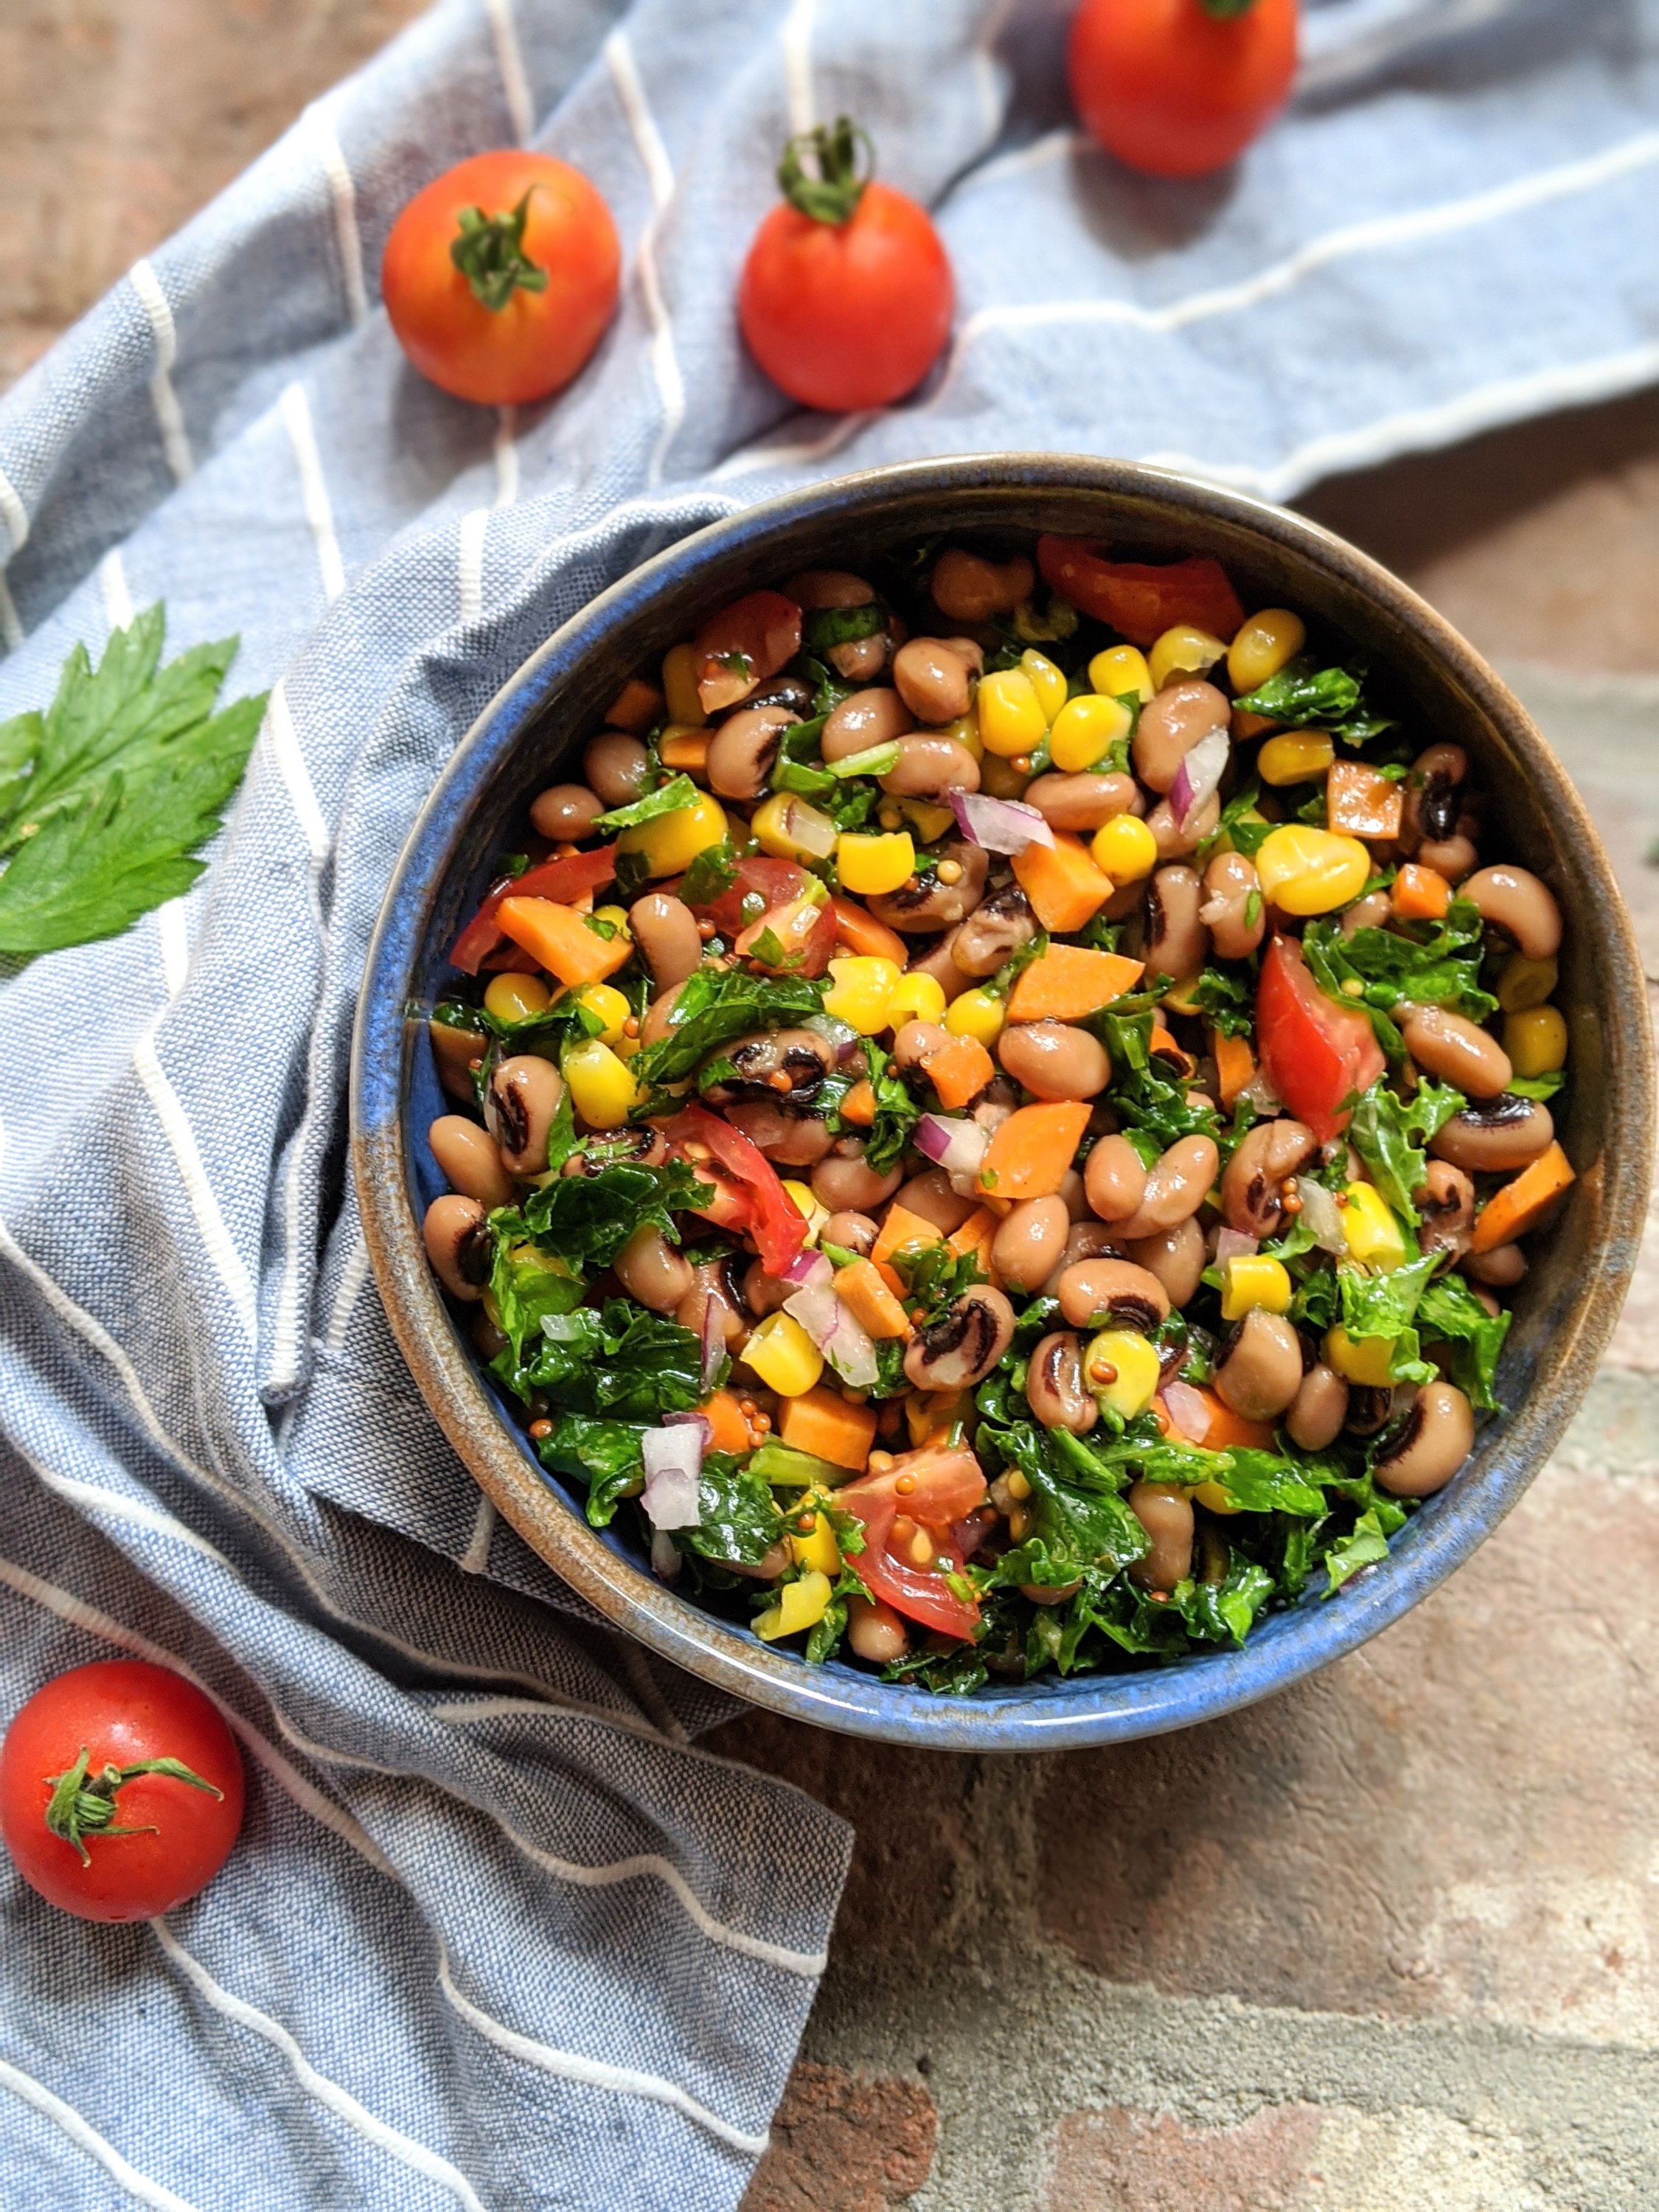 garden chopped salad with black eyed peas vegan vegetarian gluten free summer produce salad healthy recipes for summer parties southern salad recipes